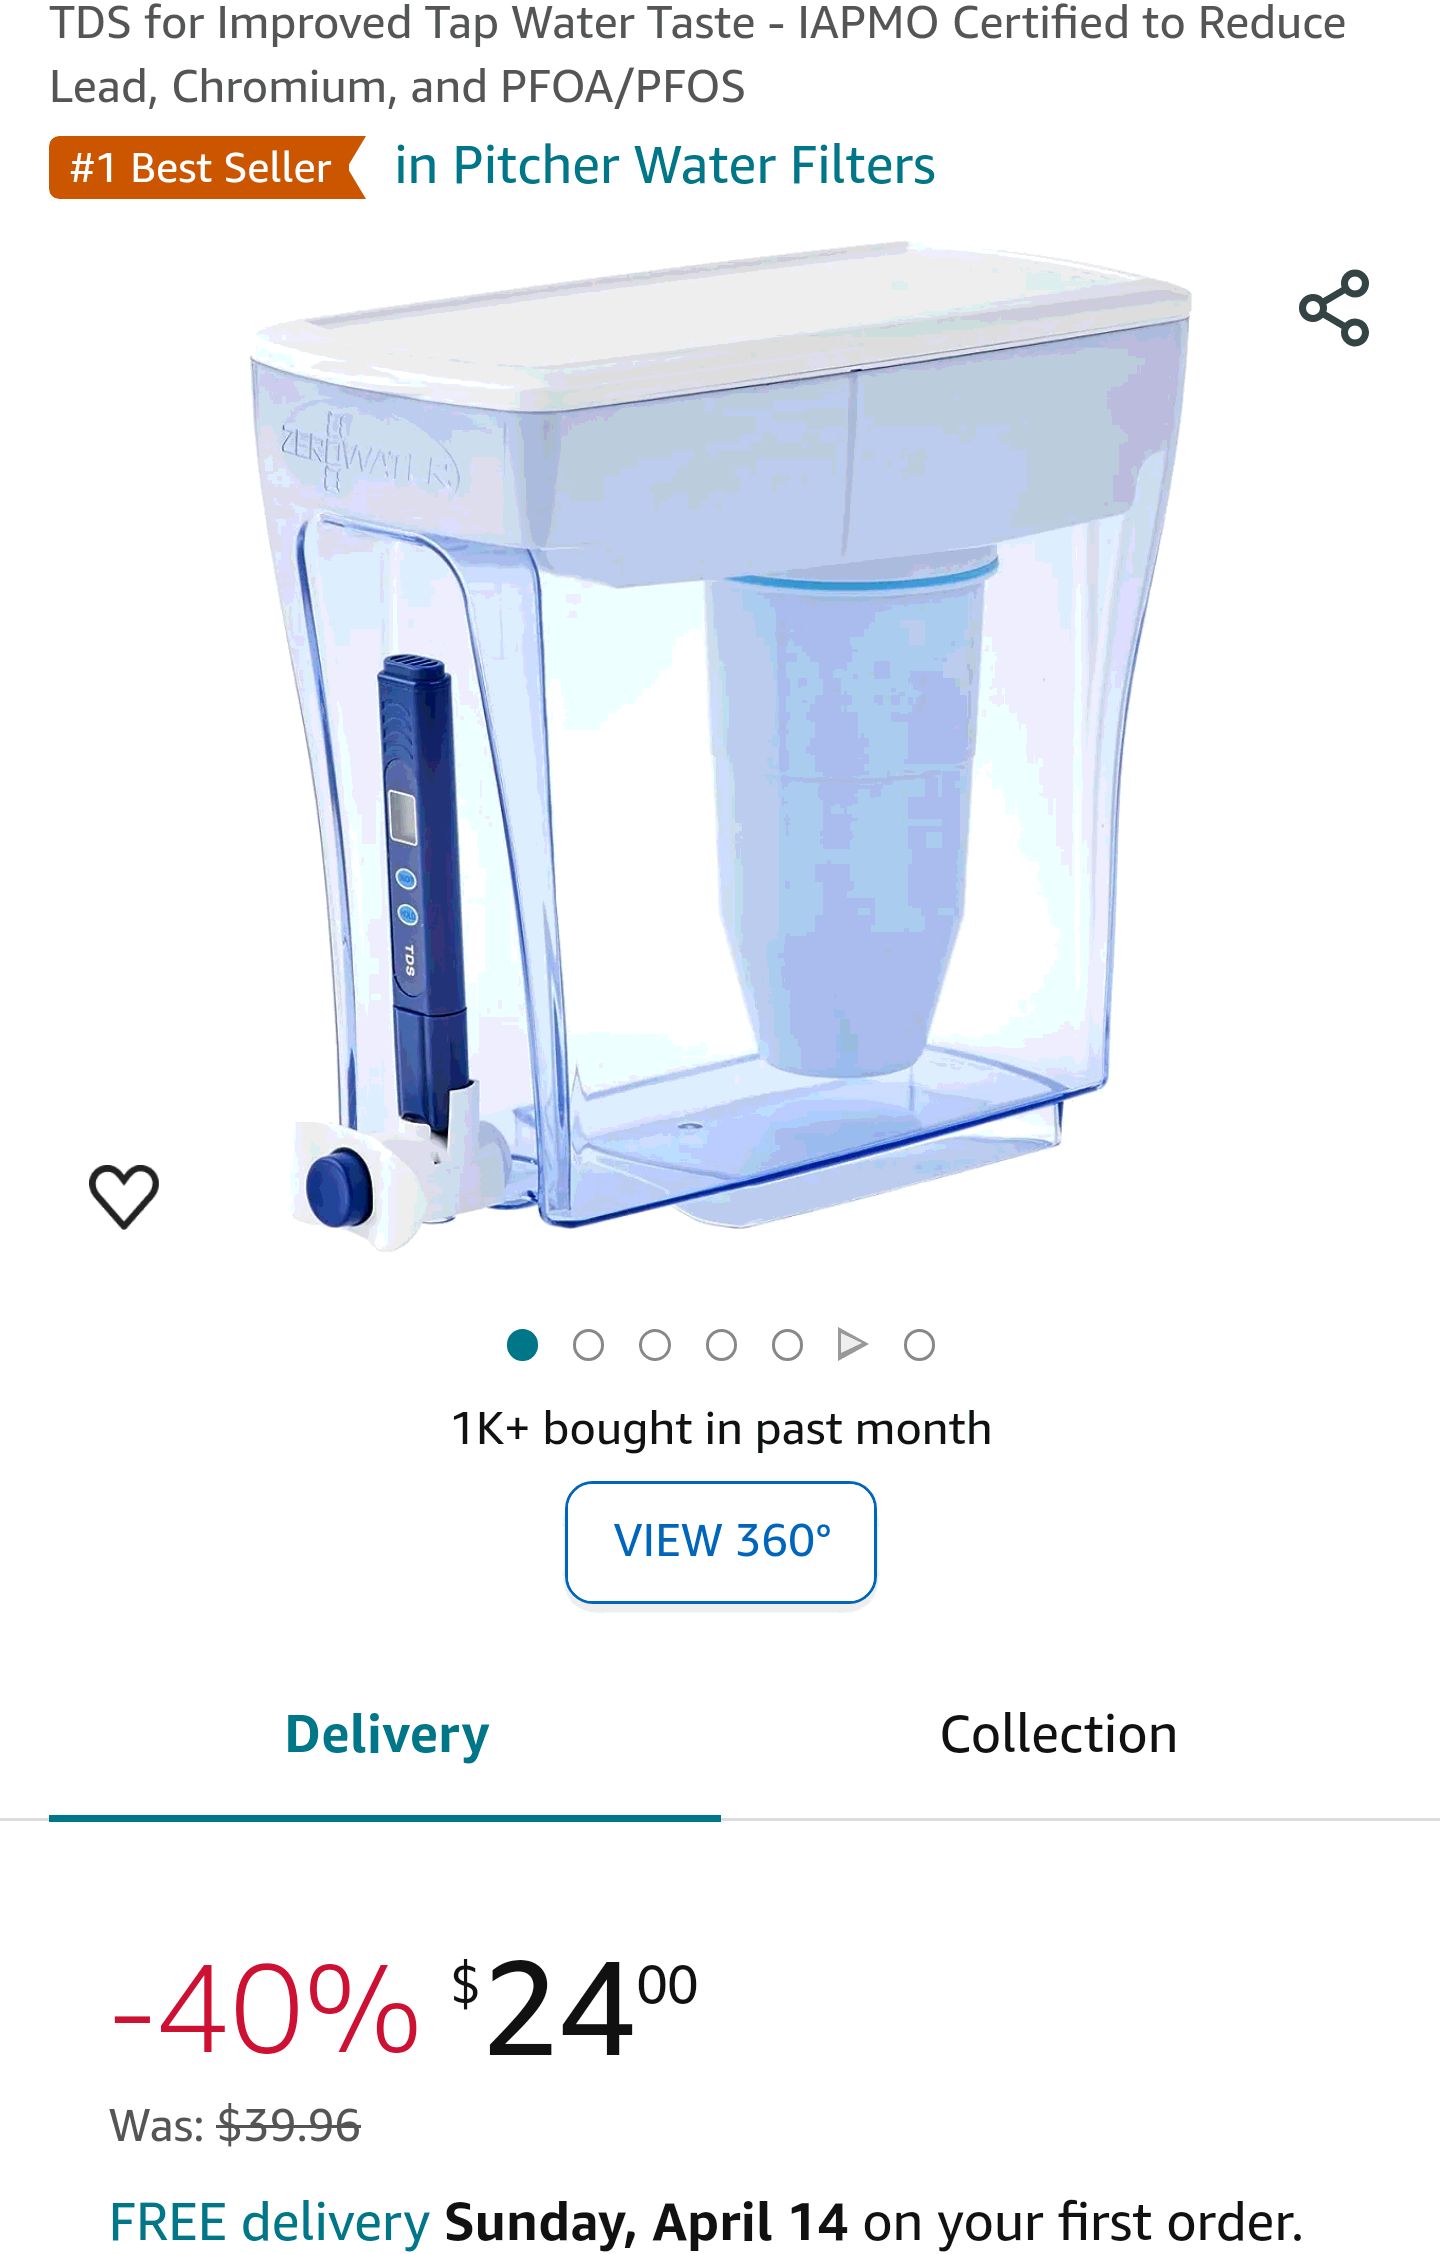 ZeroWater 20-Cup Ready-Pour 5-Stage Water Filter Pitcher 0 TDS for Improved Tap Water Taste - IAPMO Certified to Reduce Lead, Chromium, and PFOA/PFOS : Amazon.ca: Home